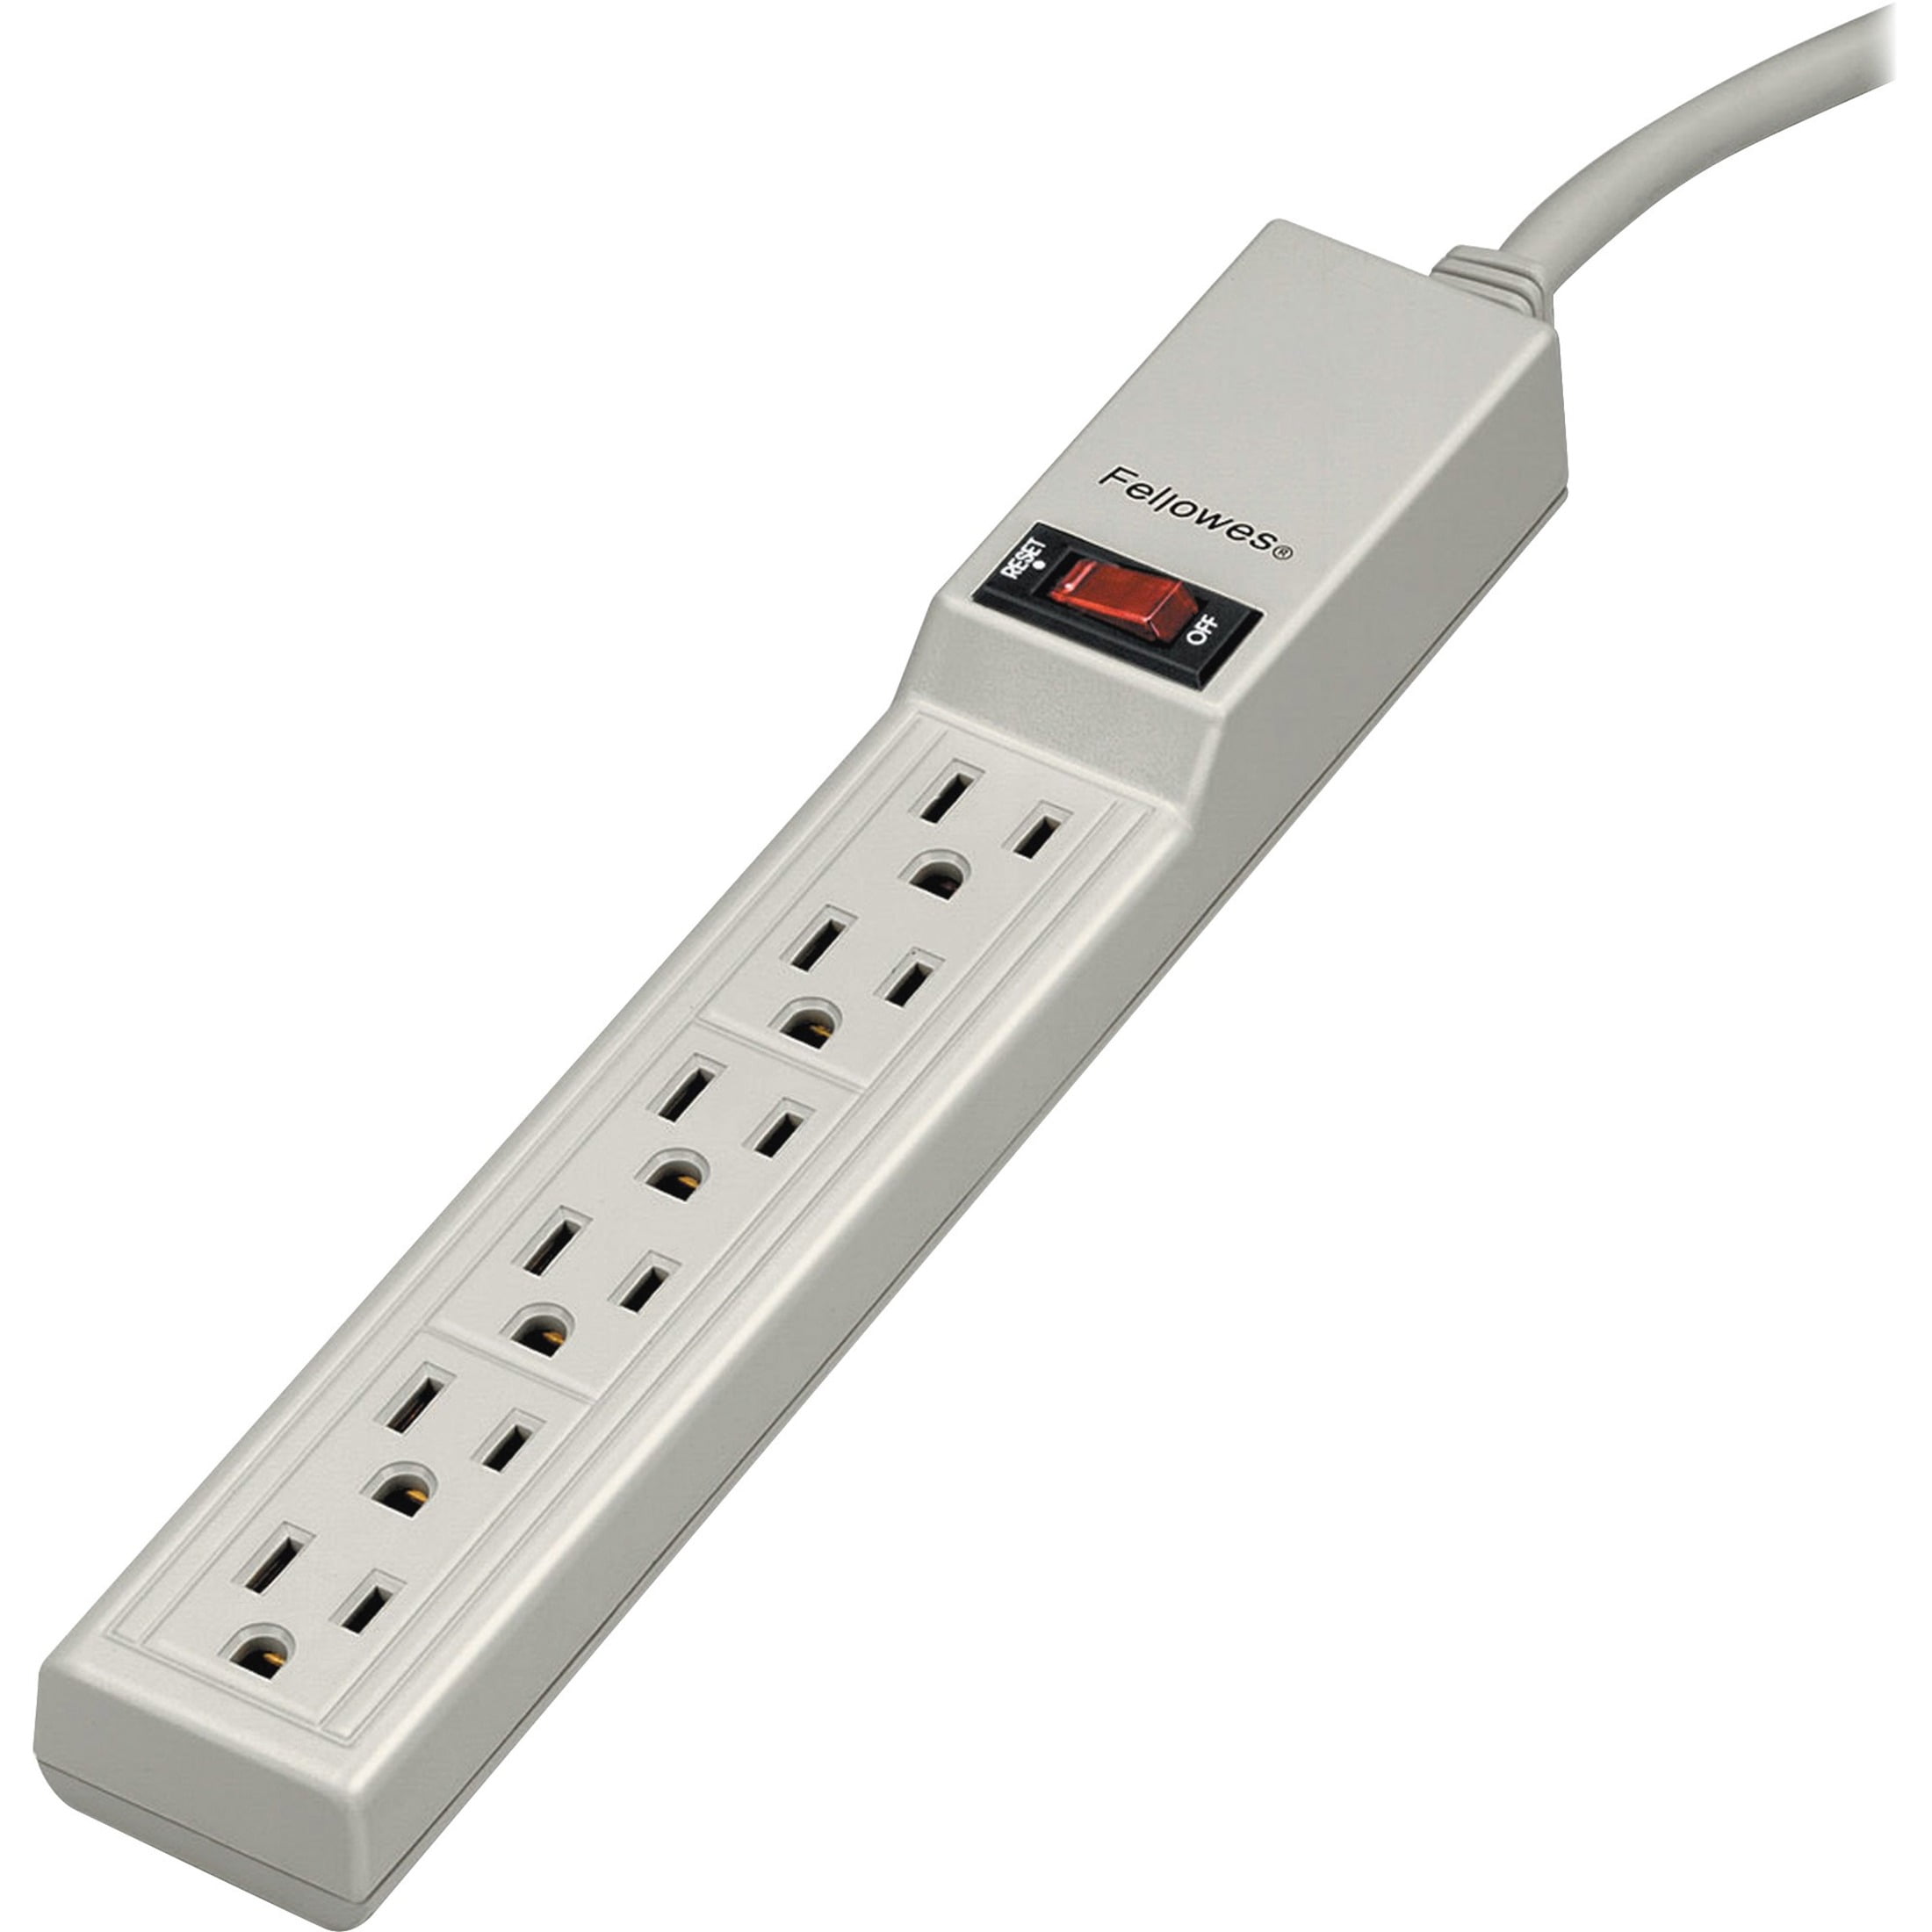 NEW Grounded Deluxe Extension Cord Wall 7-Plug Heavy Duty 110V Power Strip White 